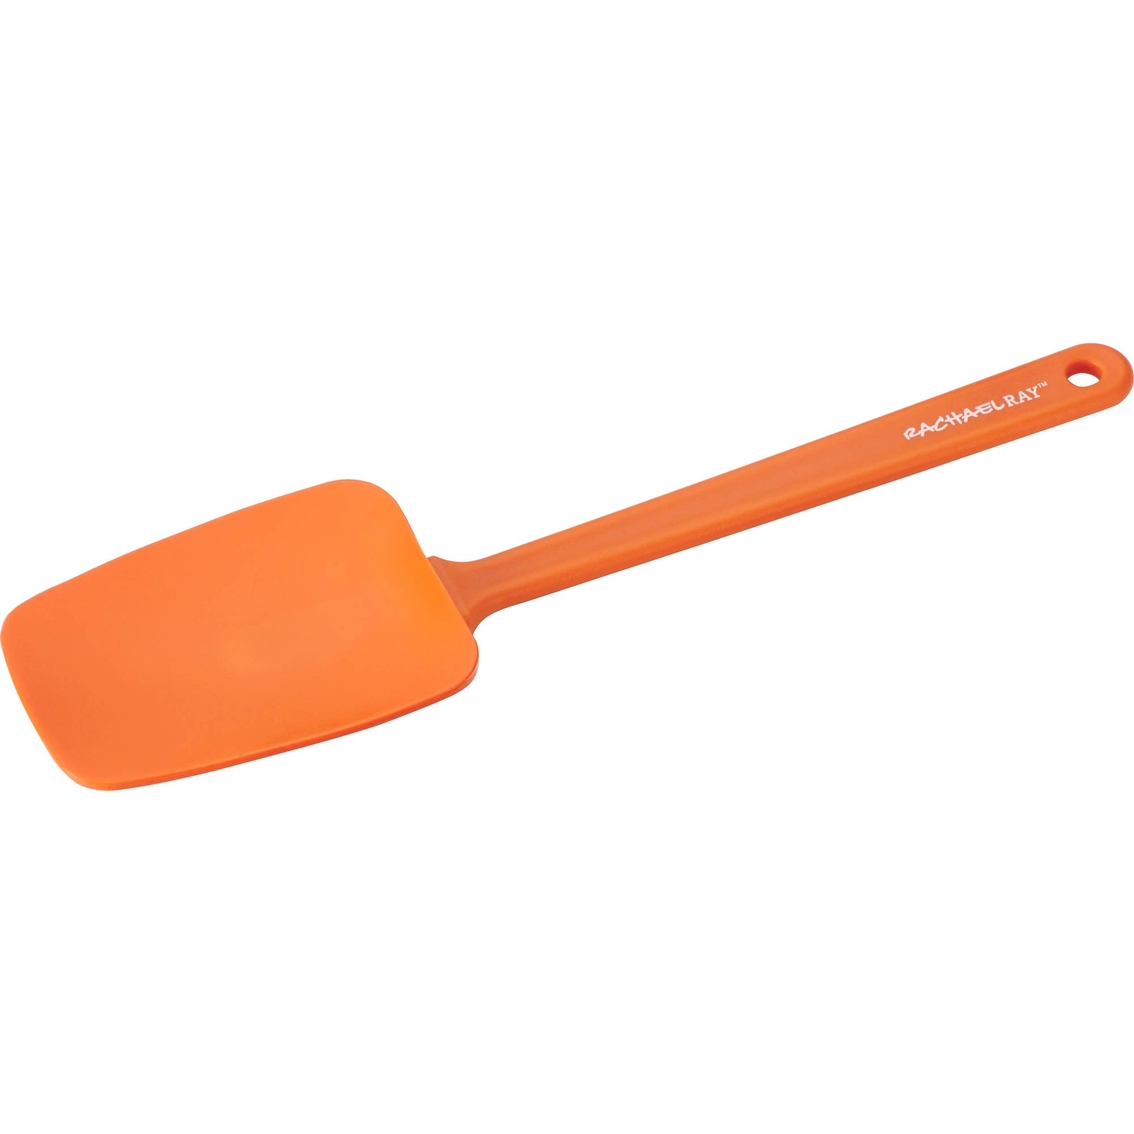 Rachael Ray Lil' Devils Silicone Spatula 3 pc. Set - Image 2 of 2